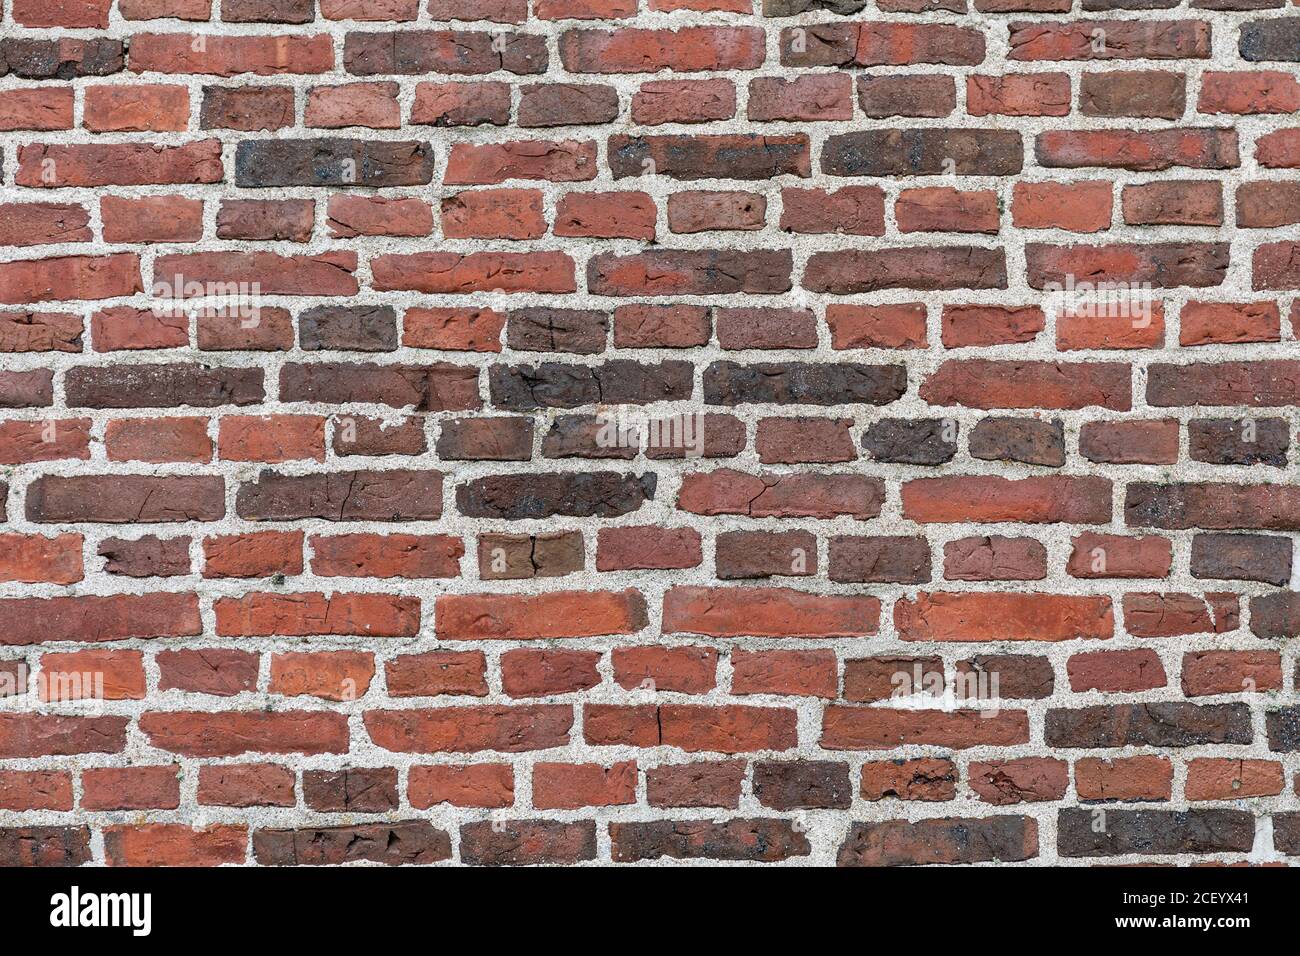 Old brickwall for background or blog header Stock Photo